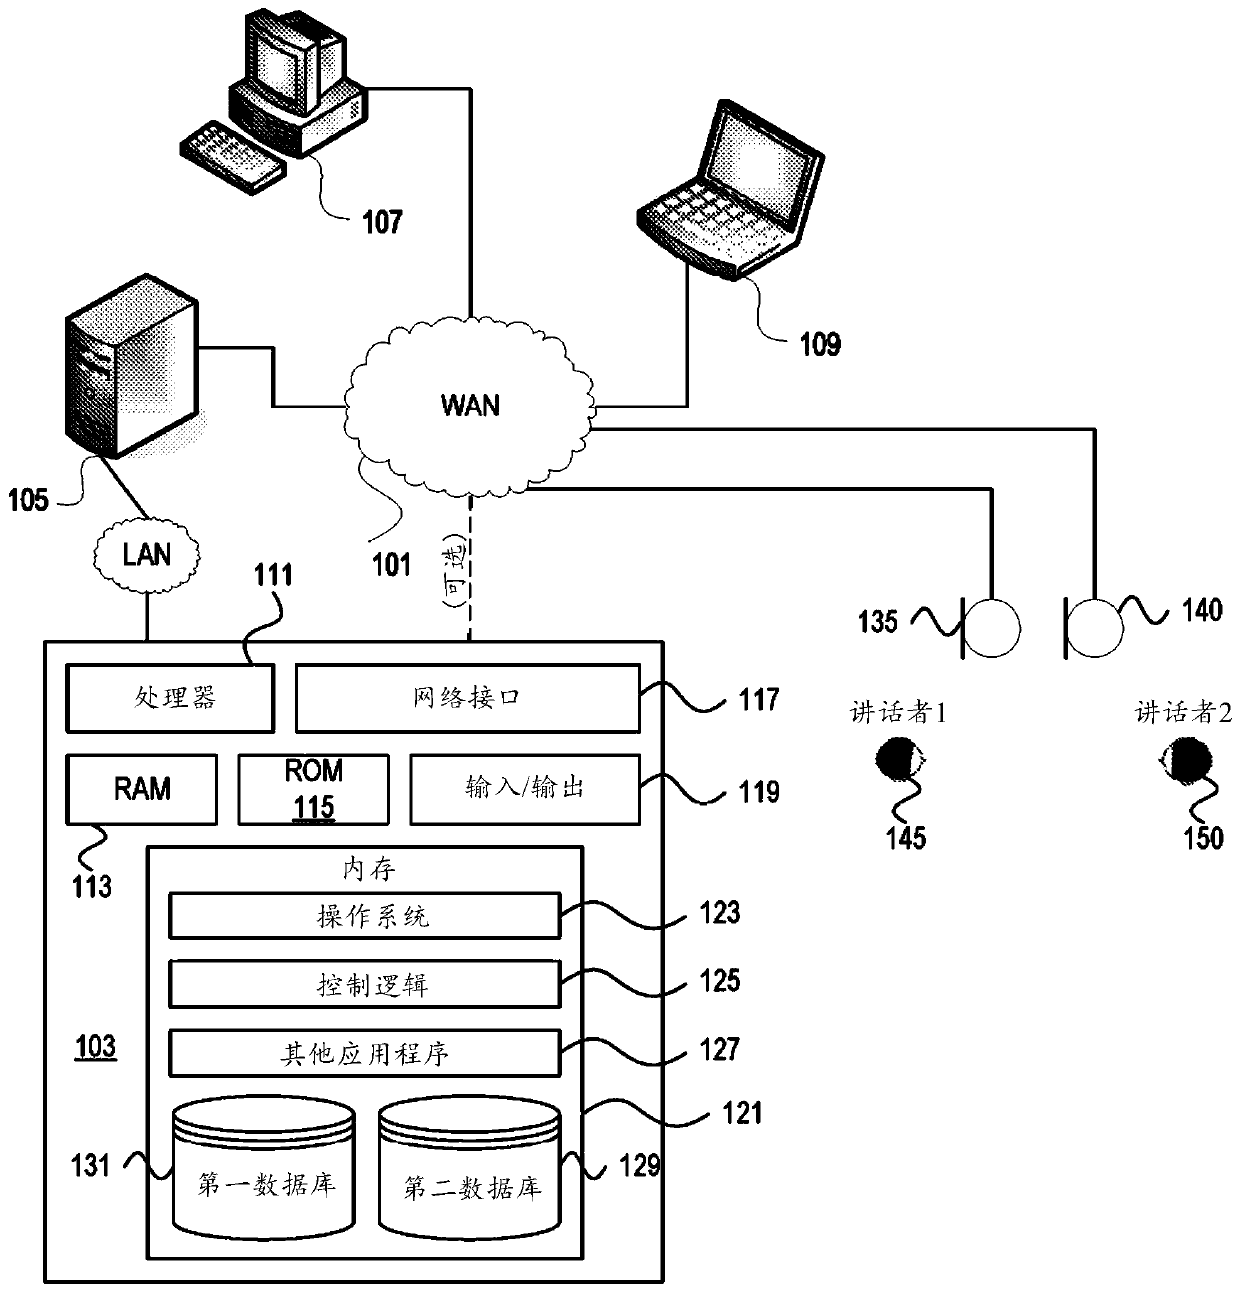 Microphone selection and multi-talker segmentation with ambient automated speech recognition (ASR)